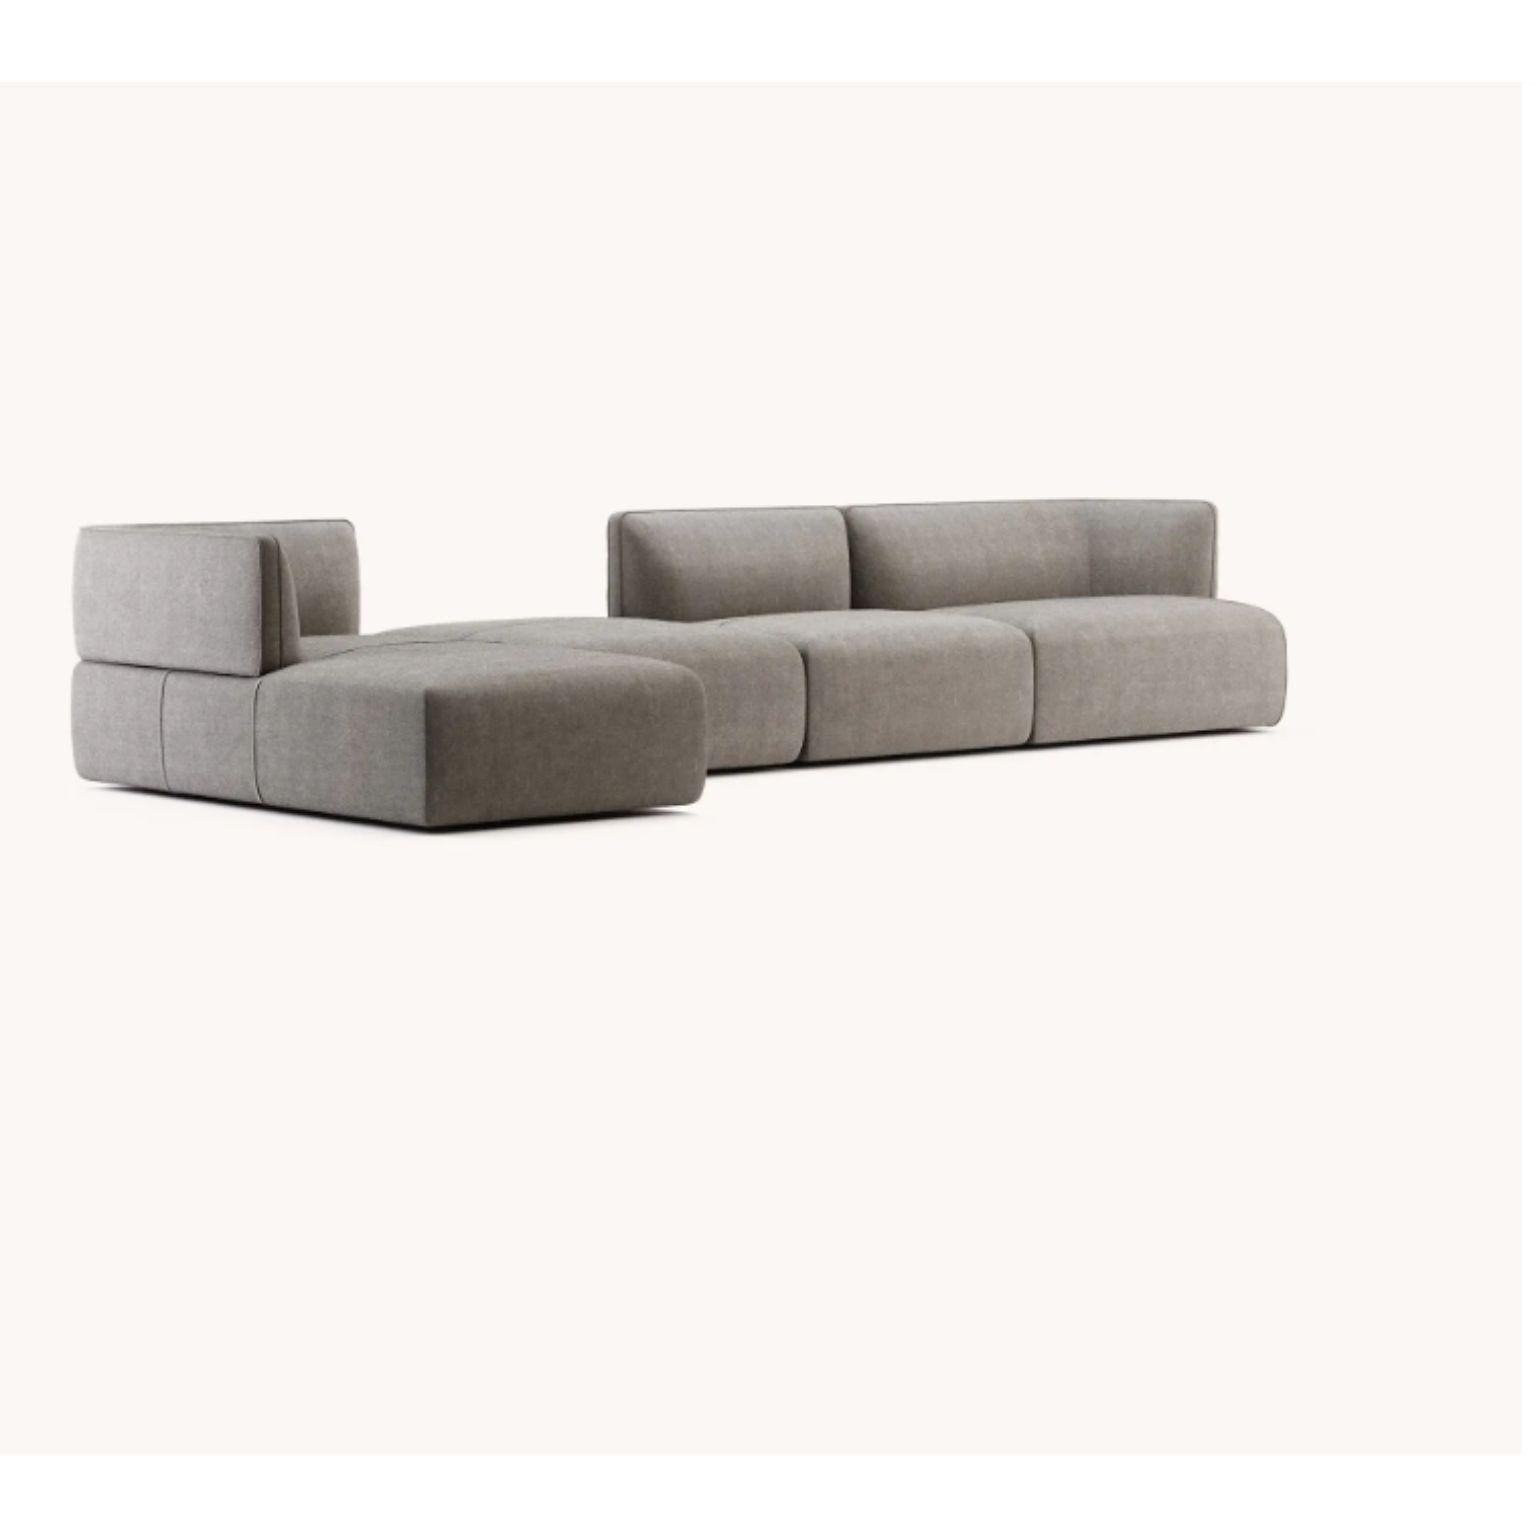 Disruption sofa by Domkapa
Materials: Fabric (Logone 01).
Dimensions: W 444.5 x D 180 x H 80 cm.
Also available in different materials.

Disruption is a modular sofa, fully upholstered, with minimalistic design and ergonomic proportions. This